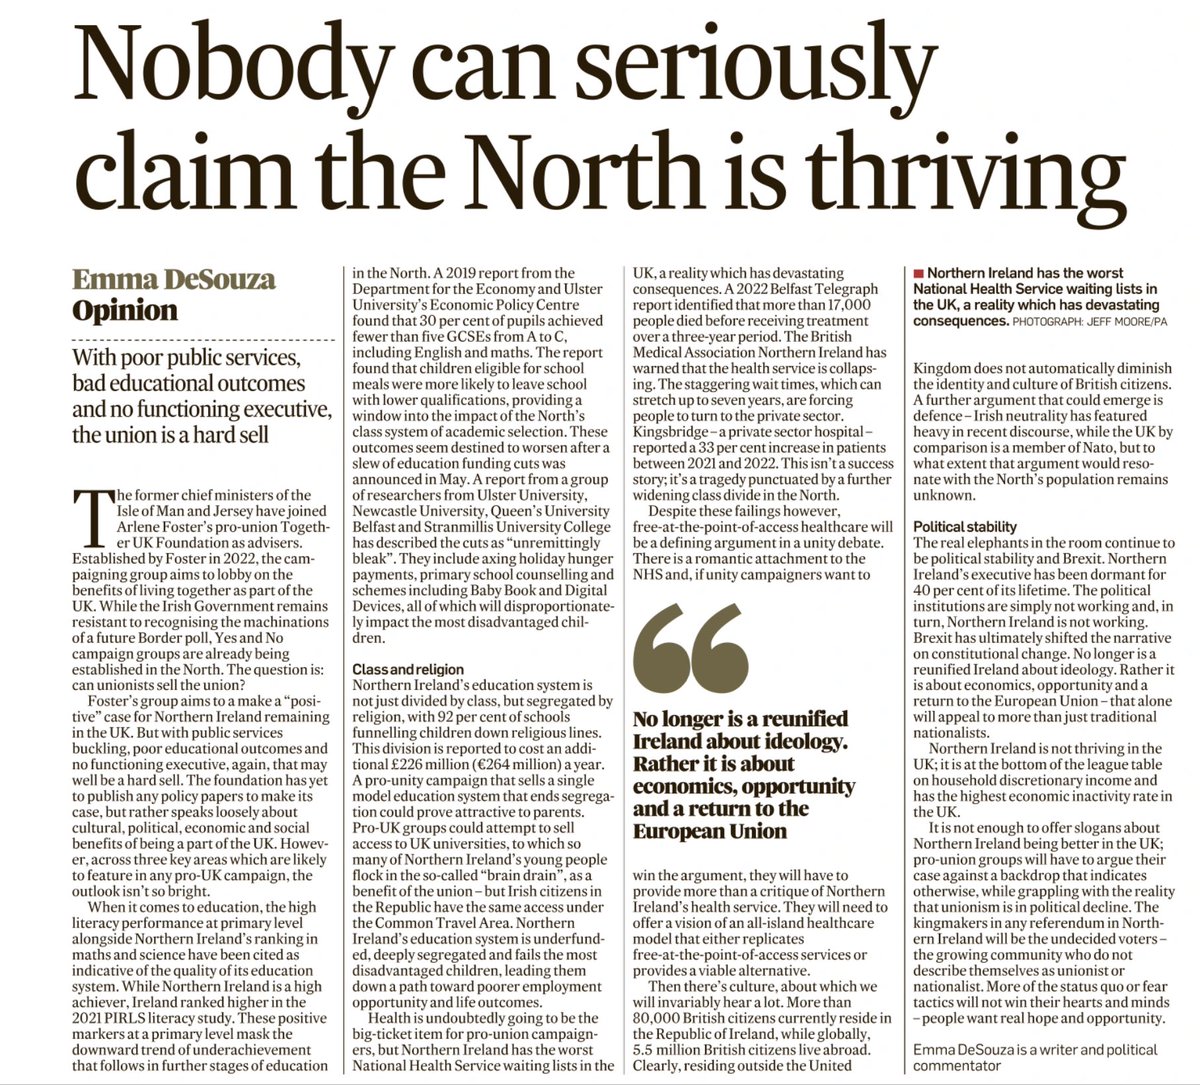 'Nobody can seriously claim the North is thriving' - Emma DeSouza